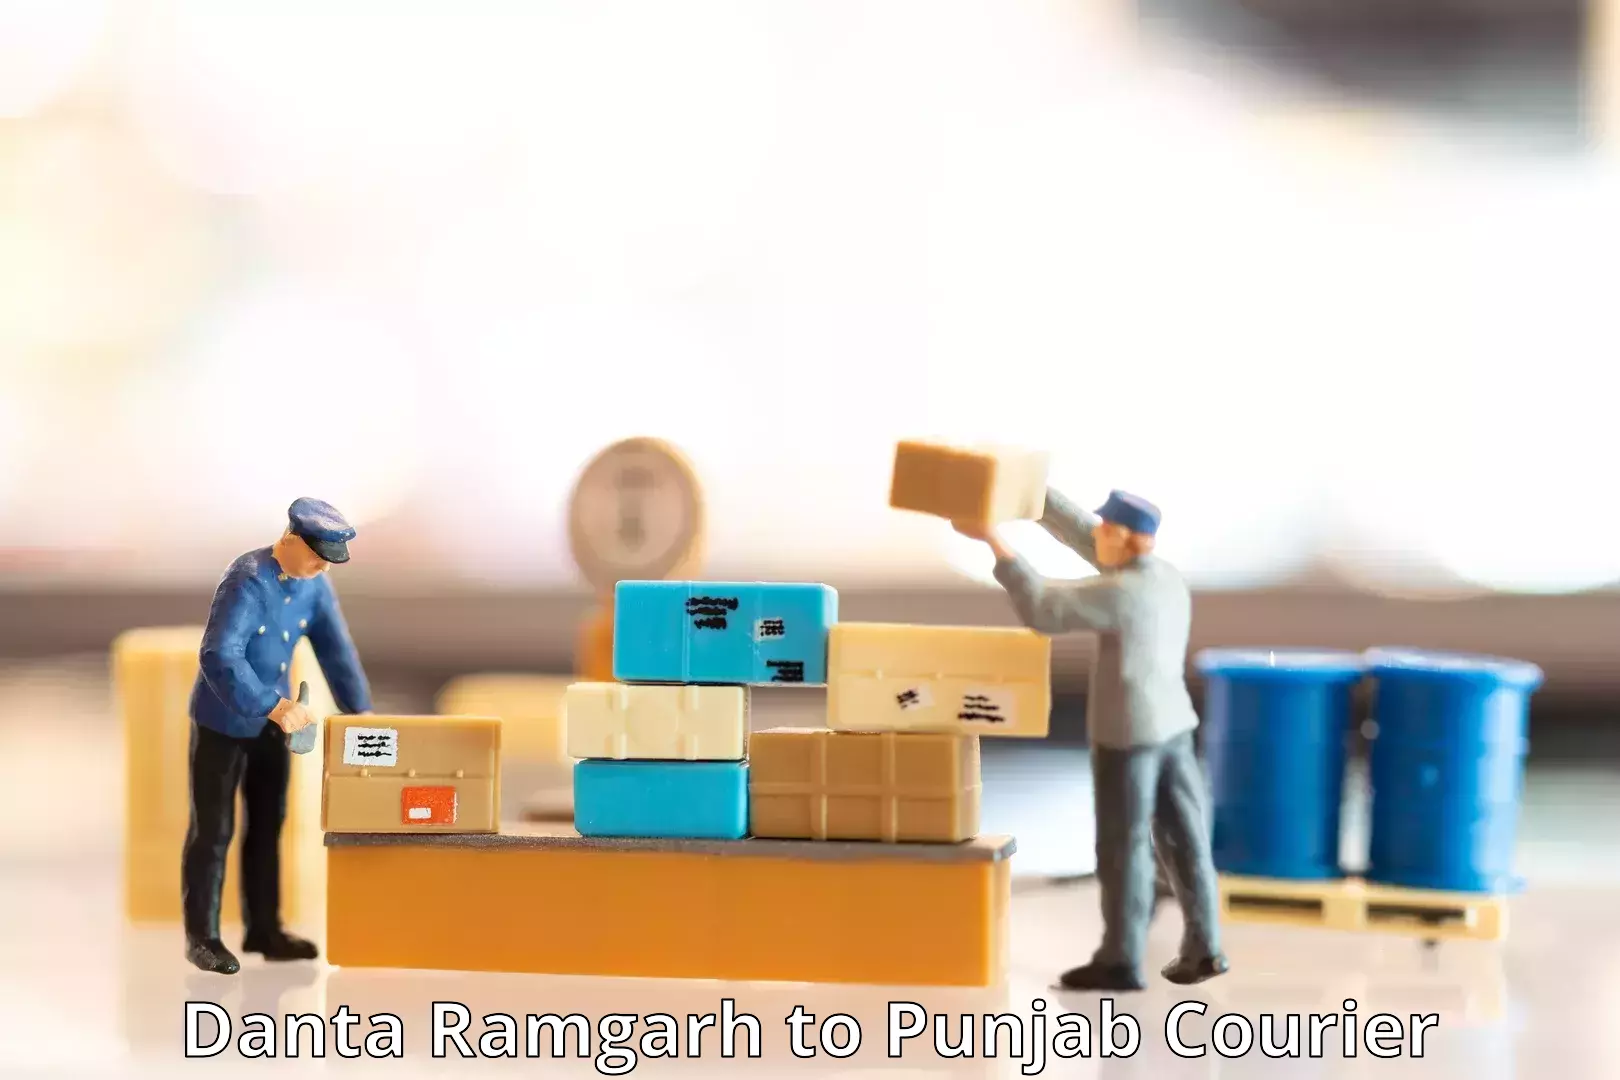 Personalized courier experiences Danta Ramgarh to Batala